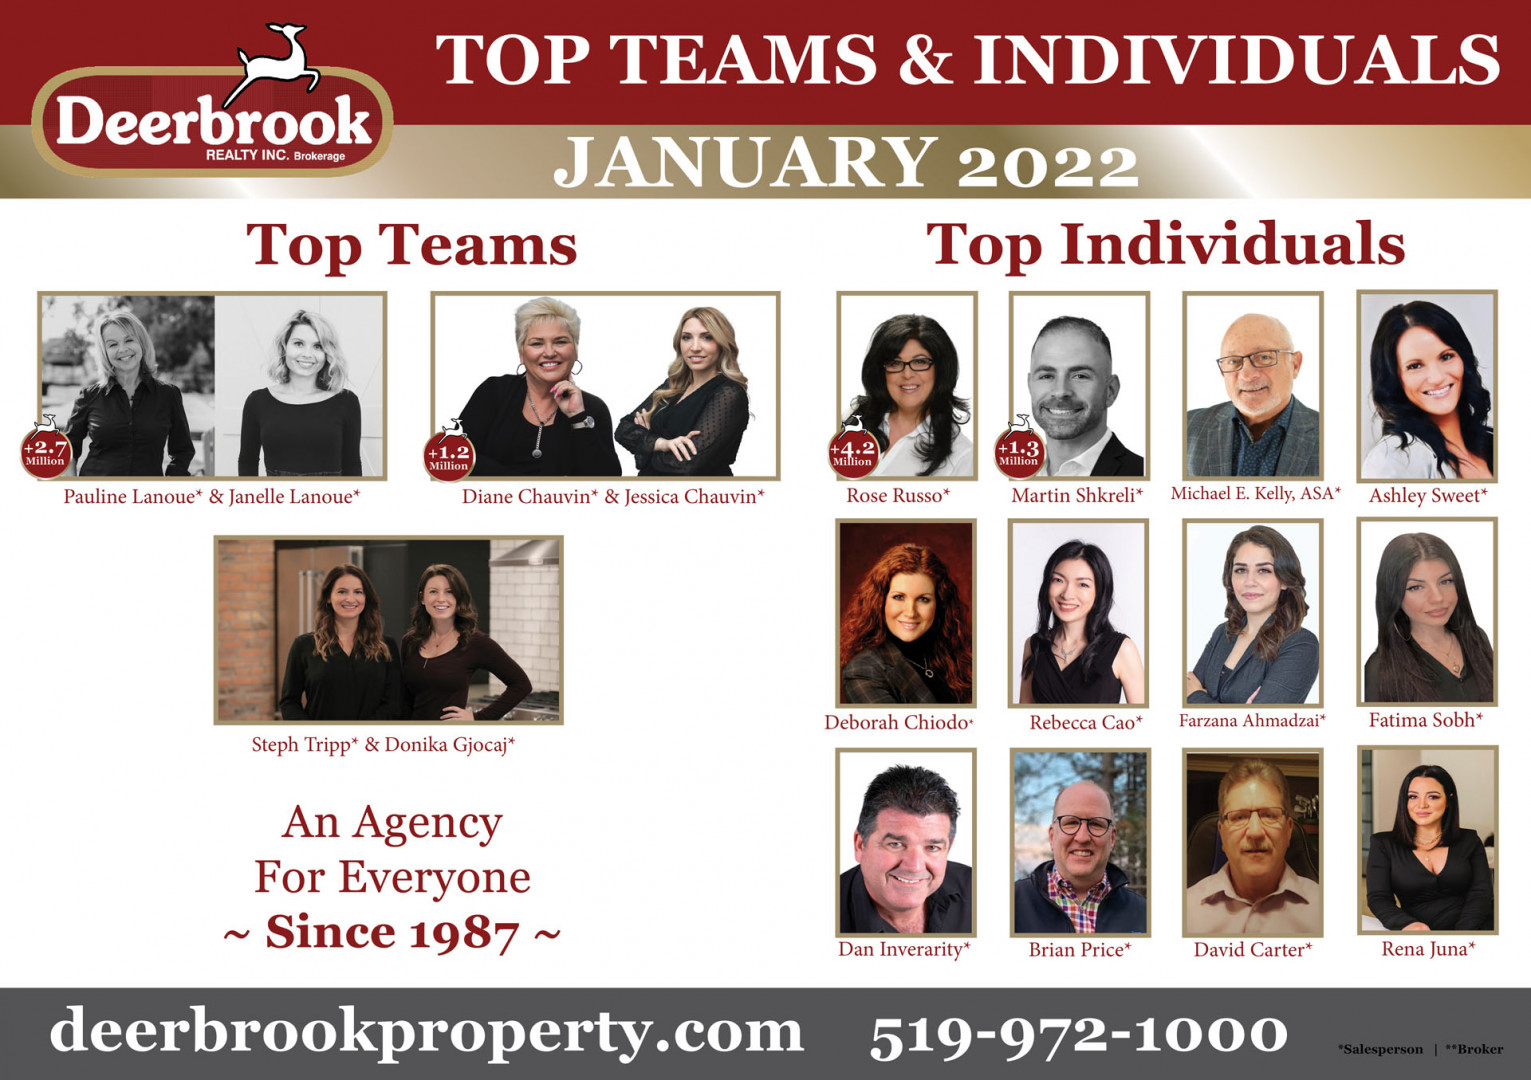 Proud to be Named the Top Team at Deerbrook for January 2022